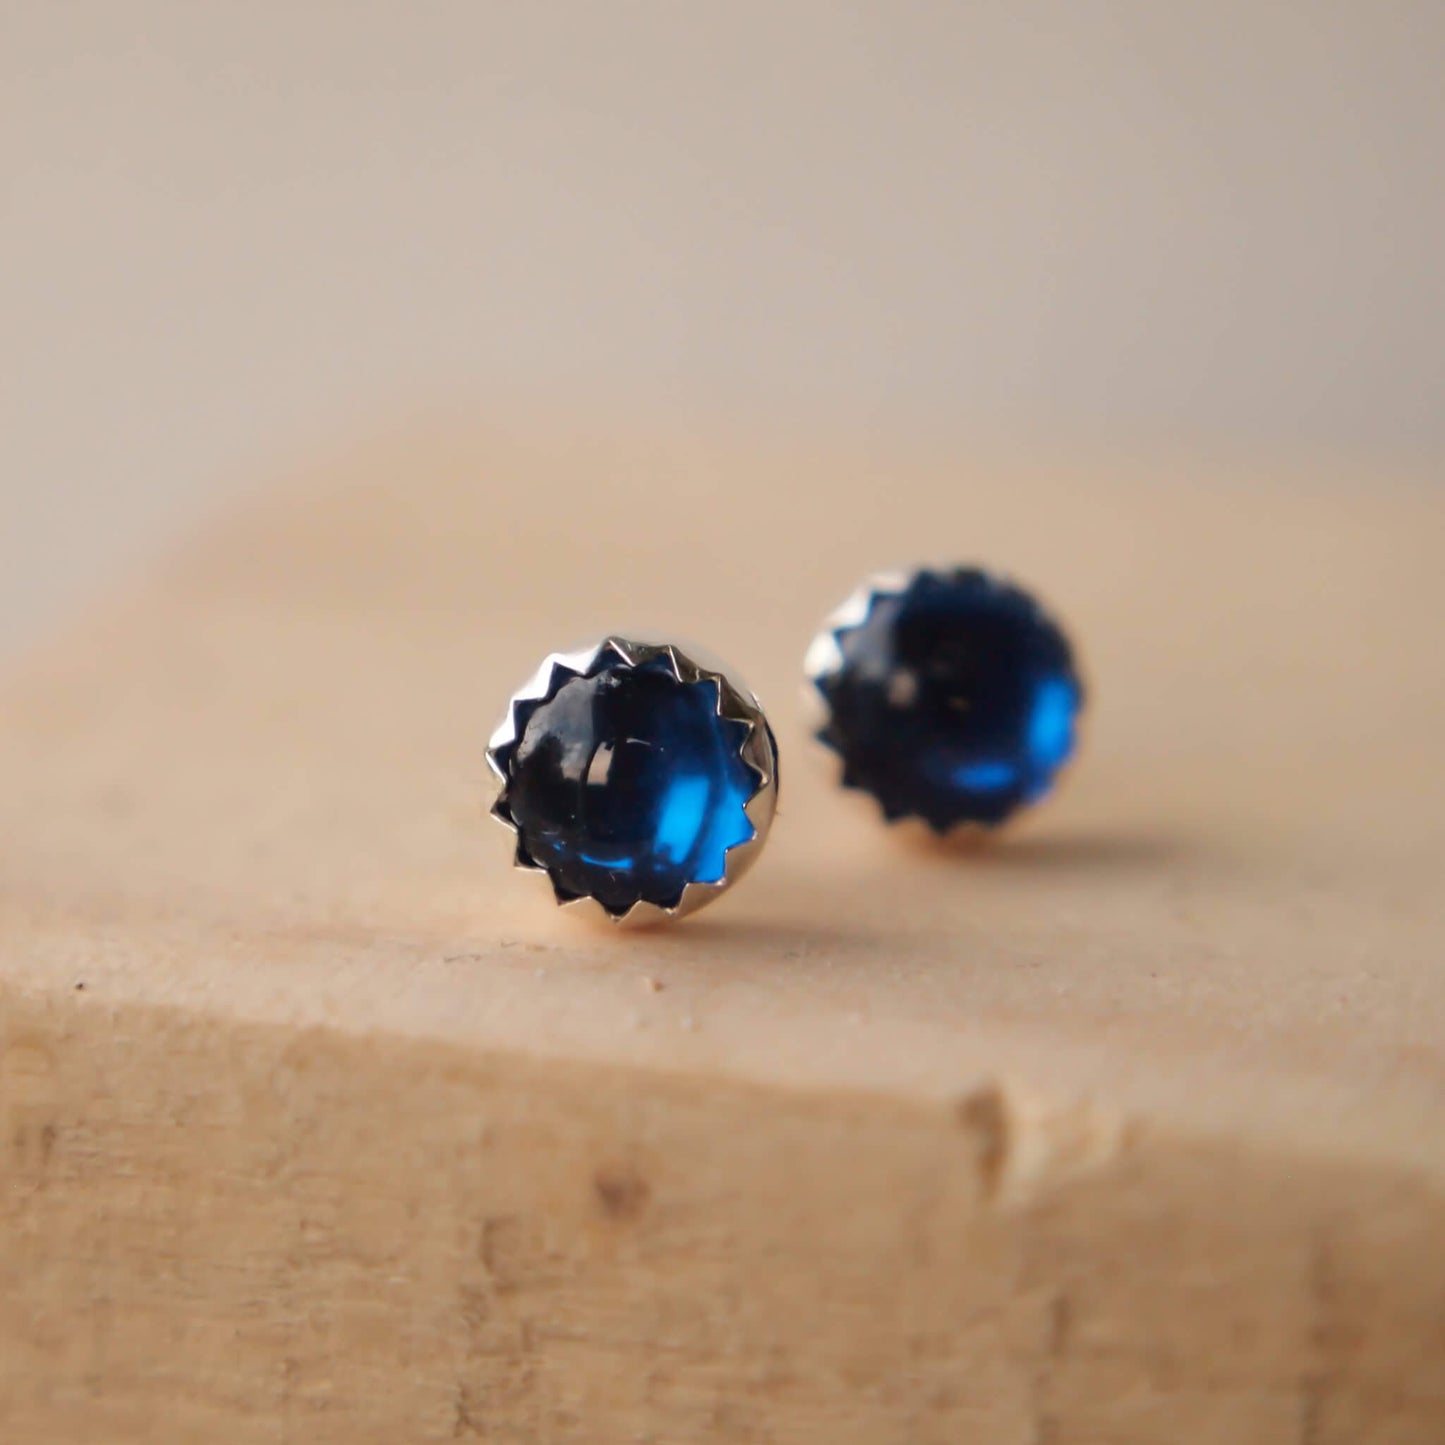 Blue Sapphire and Silver modern gemstone Earrings. Sterling Silver simple design with a pair of round 5mm lab sapphire gemstone creating ethical birthstone jewellery, and a perfect September birthstone jewellery gift. Handcrafted in Scotland UK by a small designer Jeweller, maram jewellery